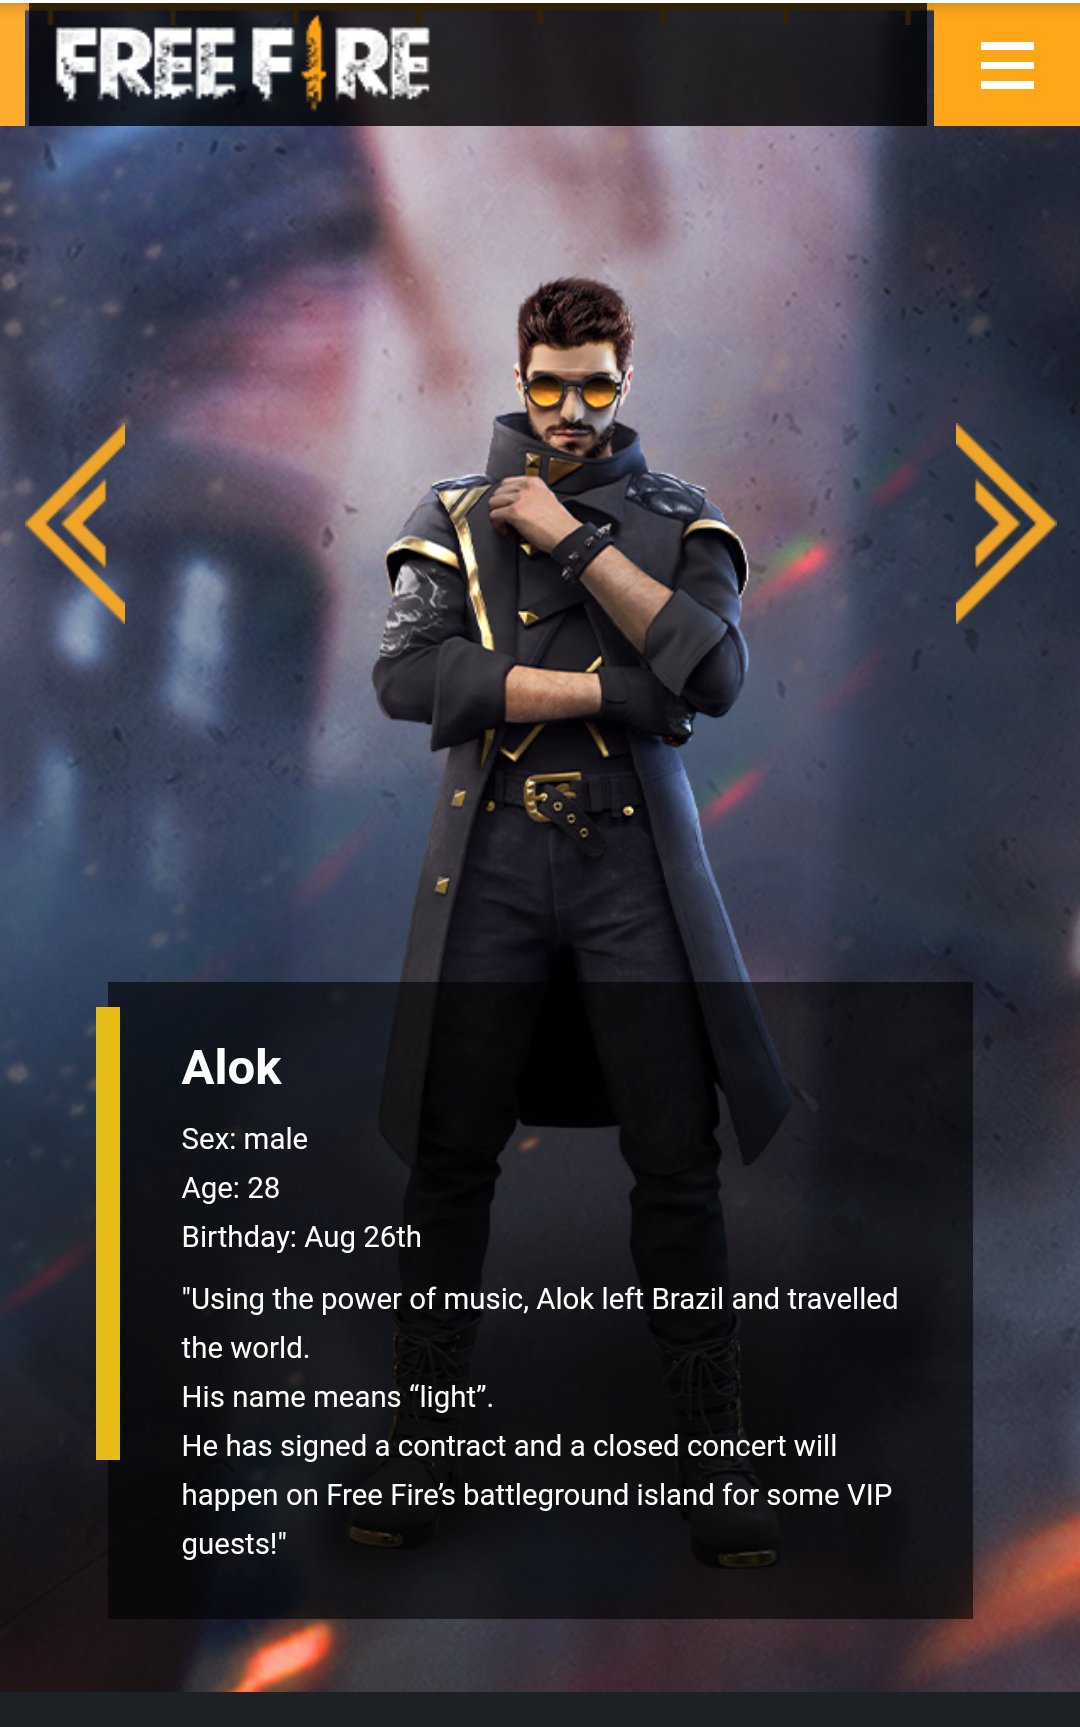 How to Get Alok in Garena Free Fire Without Using Hacks? Find out Here